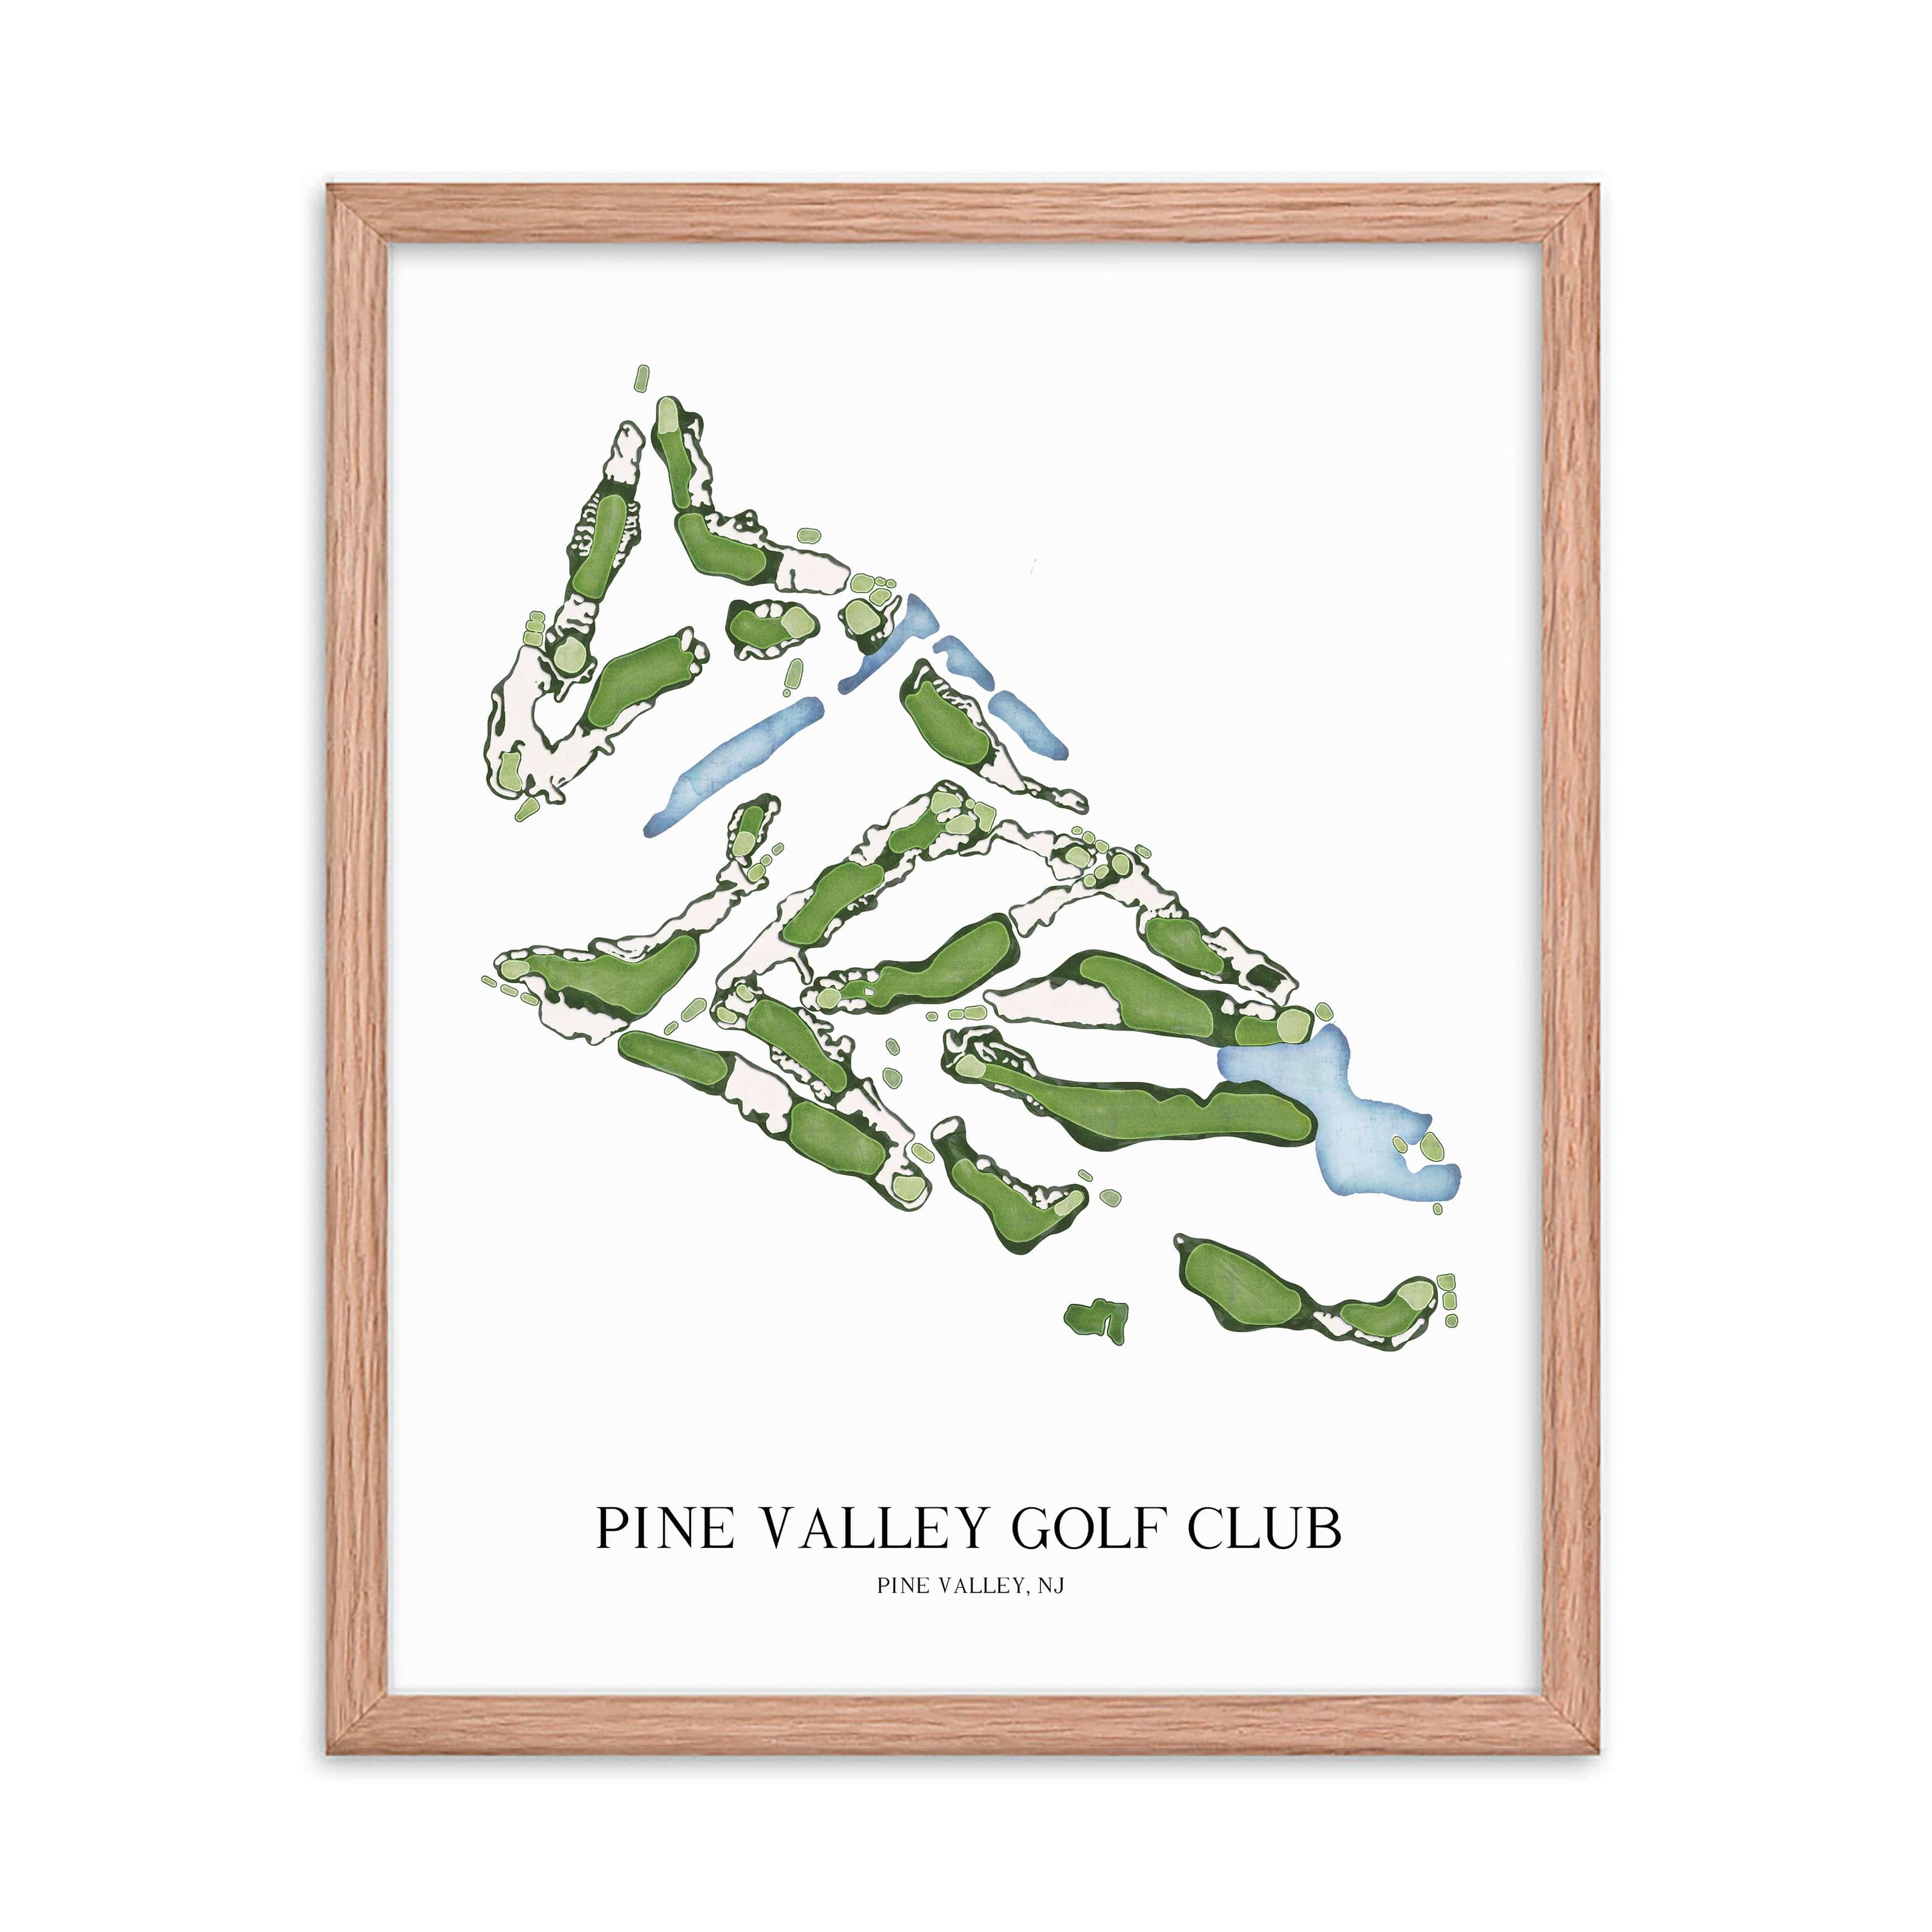 The 19th Hole Golf Shop - Golf Course Prints -  Pine Valley Golf Club Golf Course Map